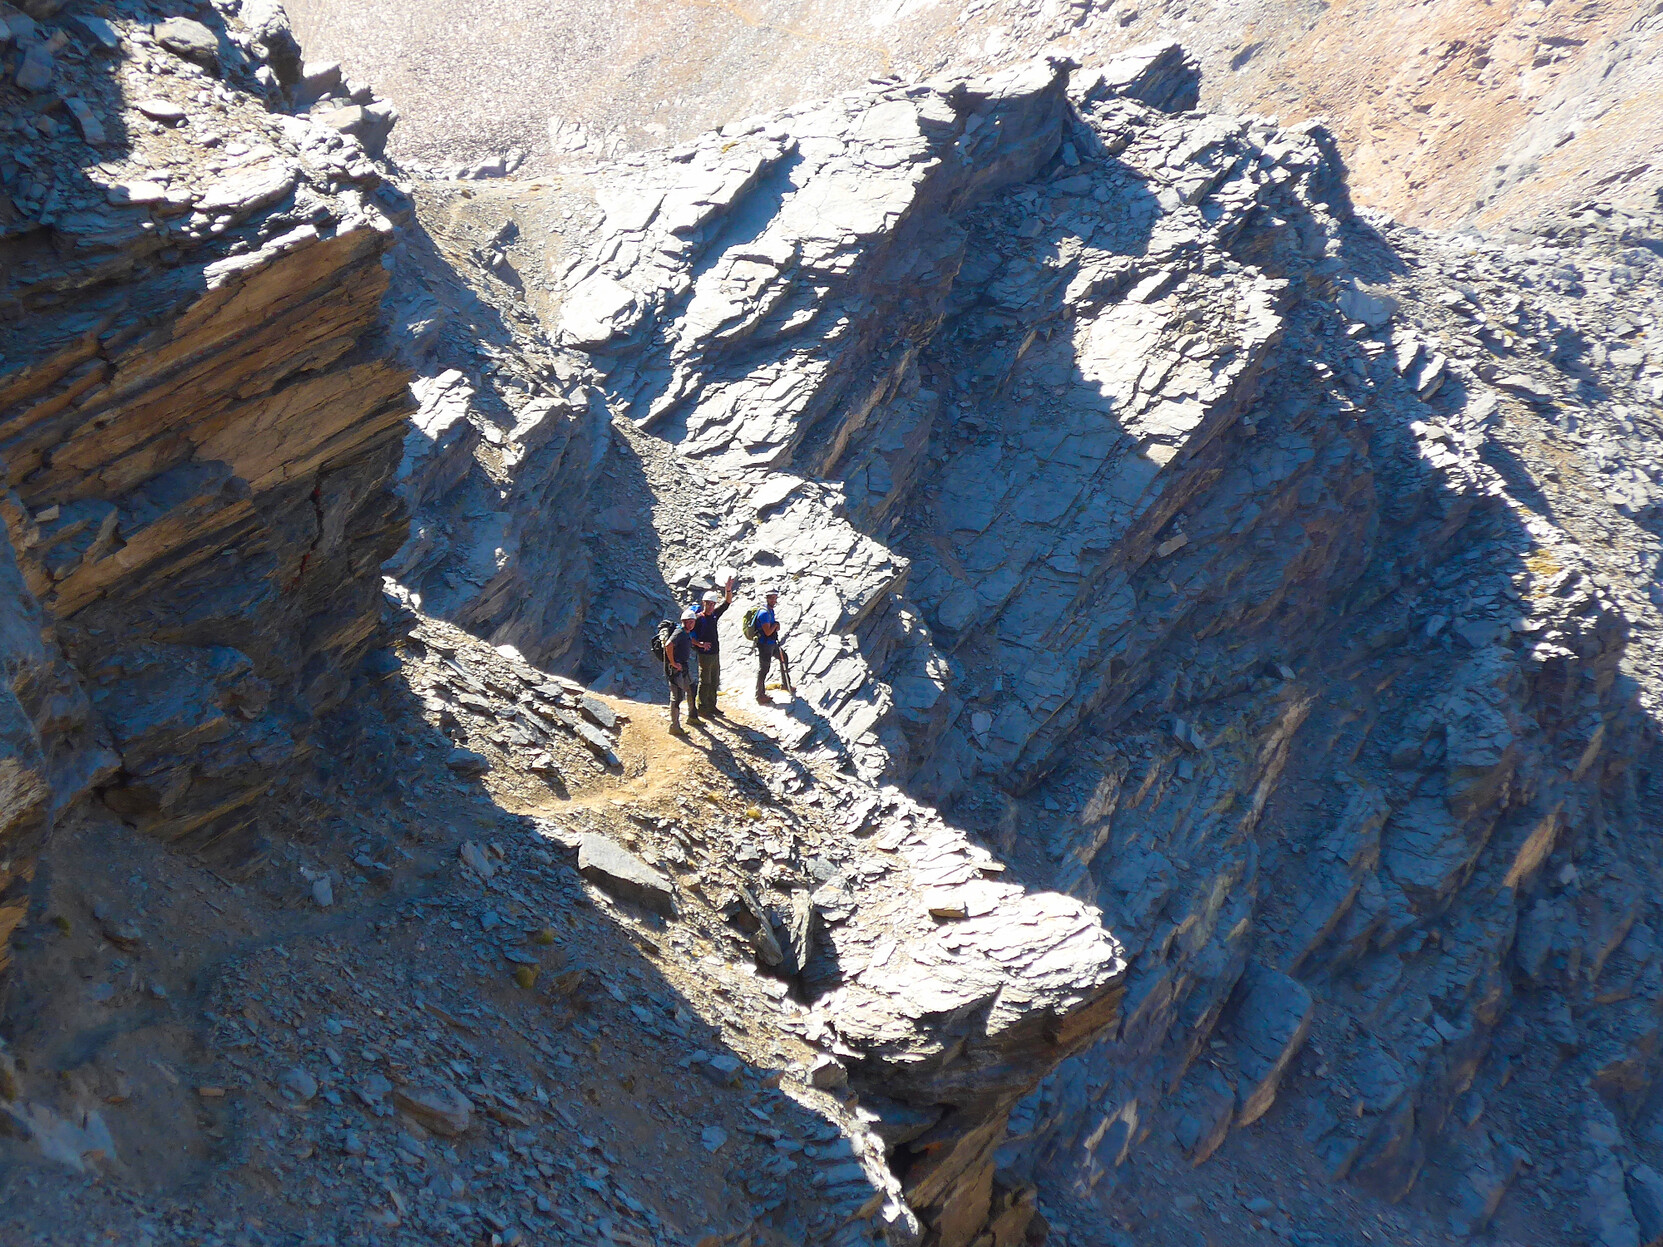 Some hikers stand on a narrow ledge illuminated in the sunlight. Steep cliffs are above them and below them.